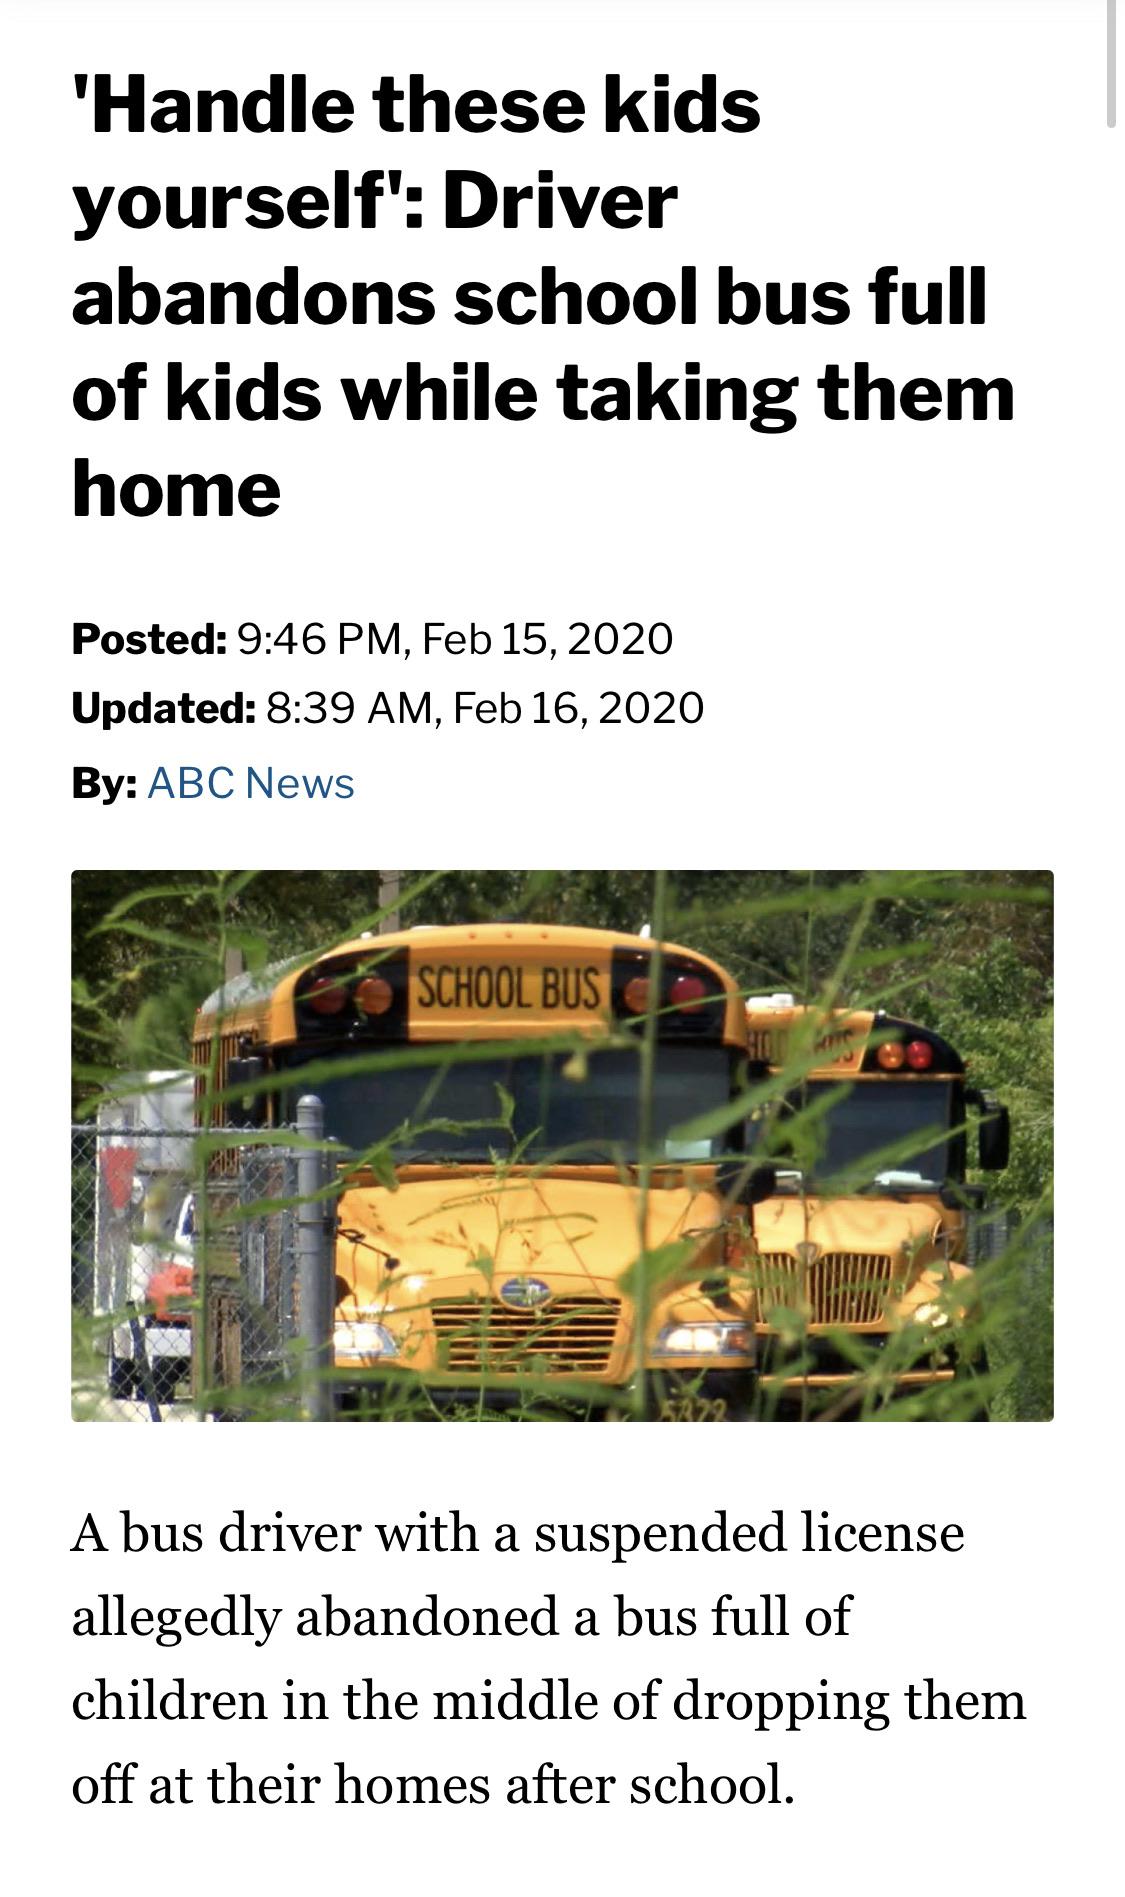 vehicle - 'Handle these kids yourself' Driver abandons school bus full of kids while taking them home Posted , Updated , By Abc News School Bus A bus driver with a suspended license allegedly abandoned a bus full of children in the middle of dropping them